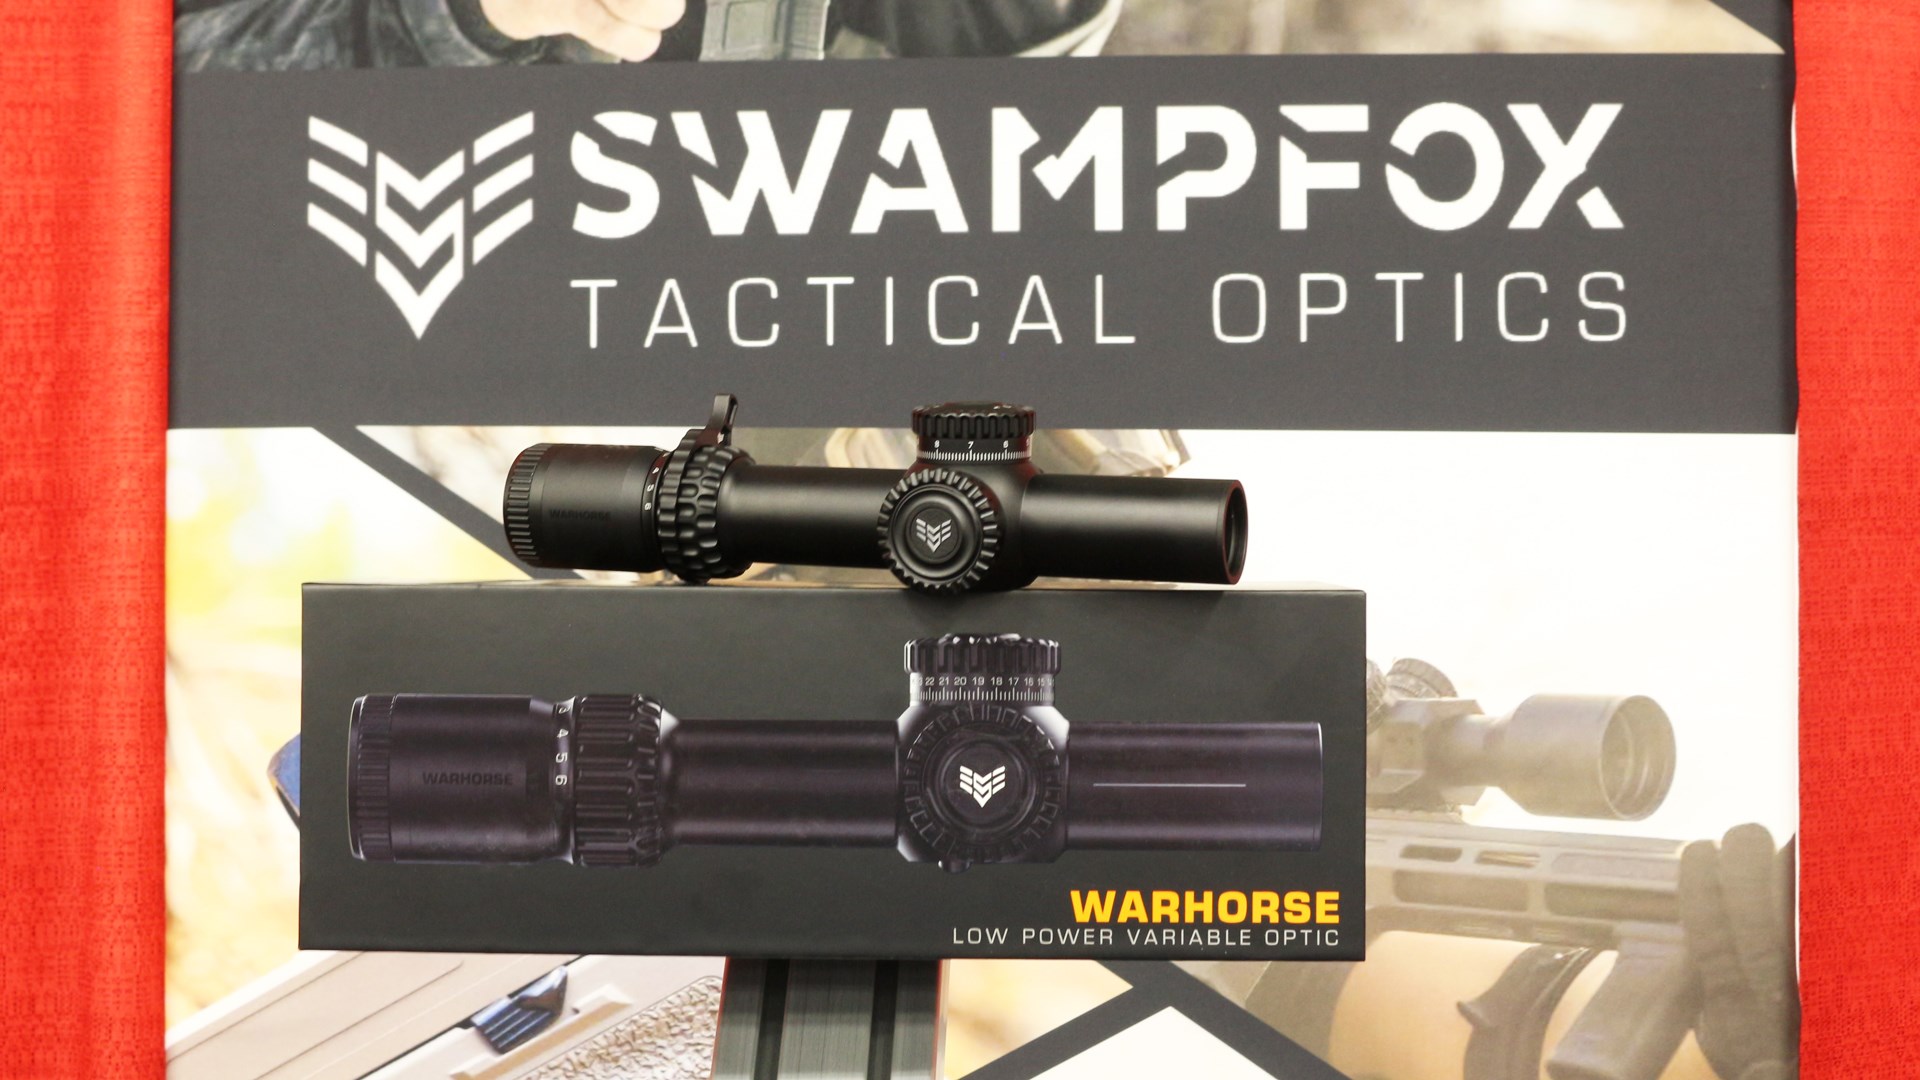 Swampfox tactical optics box with riflescope on top shown on display at nasgw show